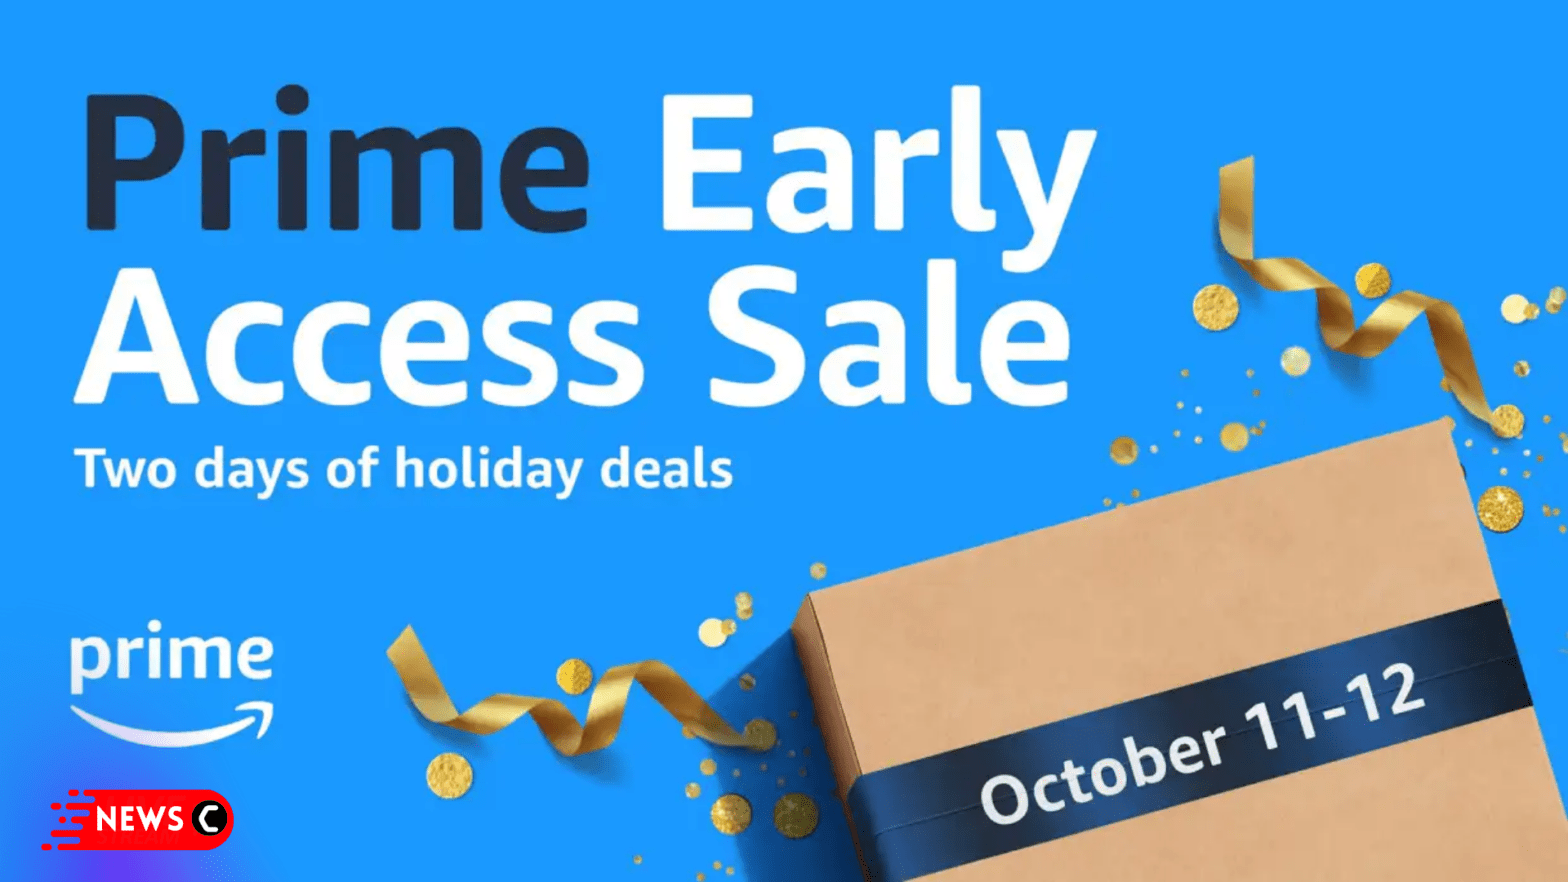 Amazon Prime Early Access Sale is Live NOW!